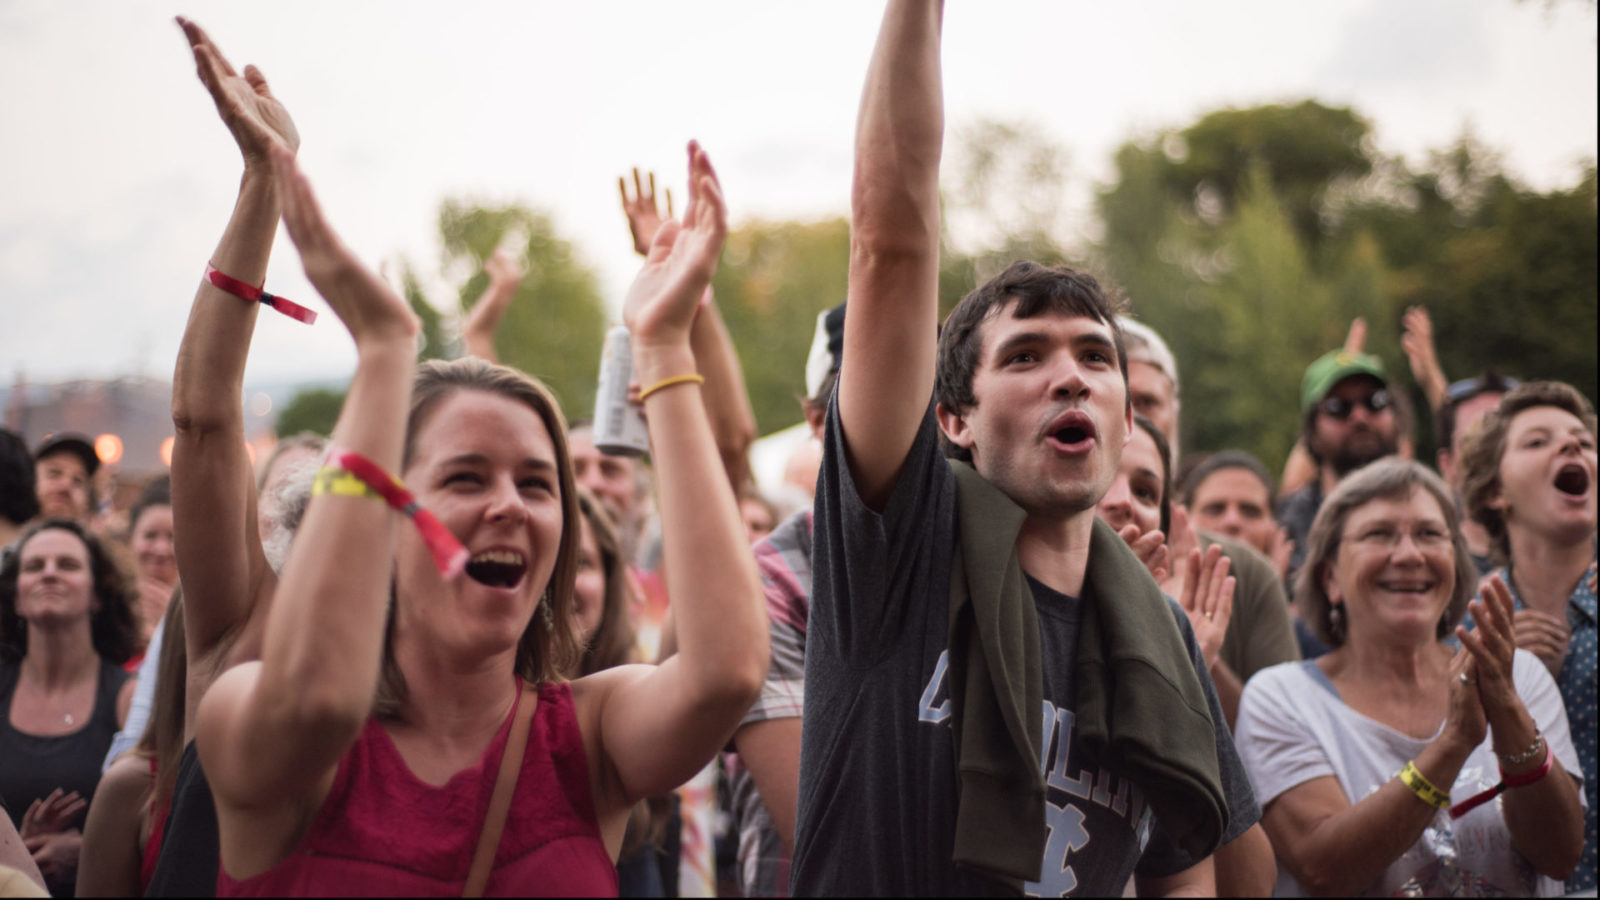 The crowd waves and cheers around the outdoor stage at FreshGrass 2017. Press photo courtesy of Mass MoCA.